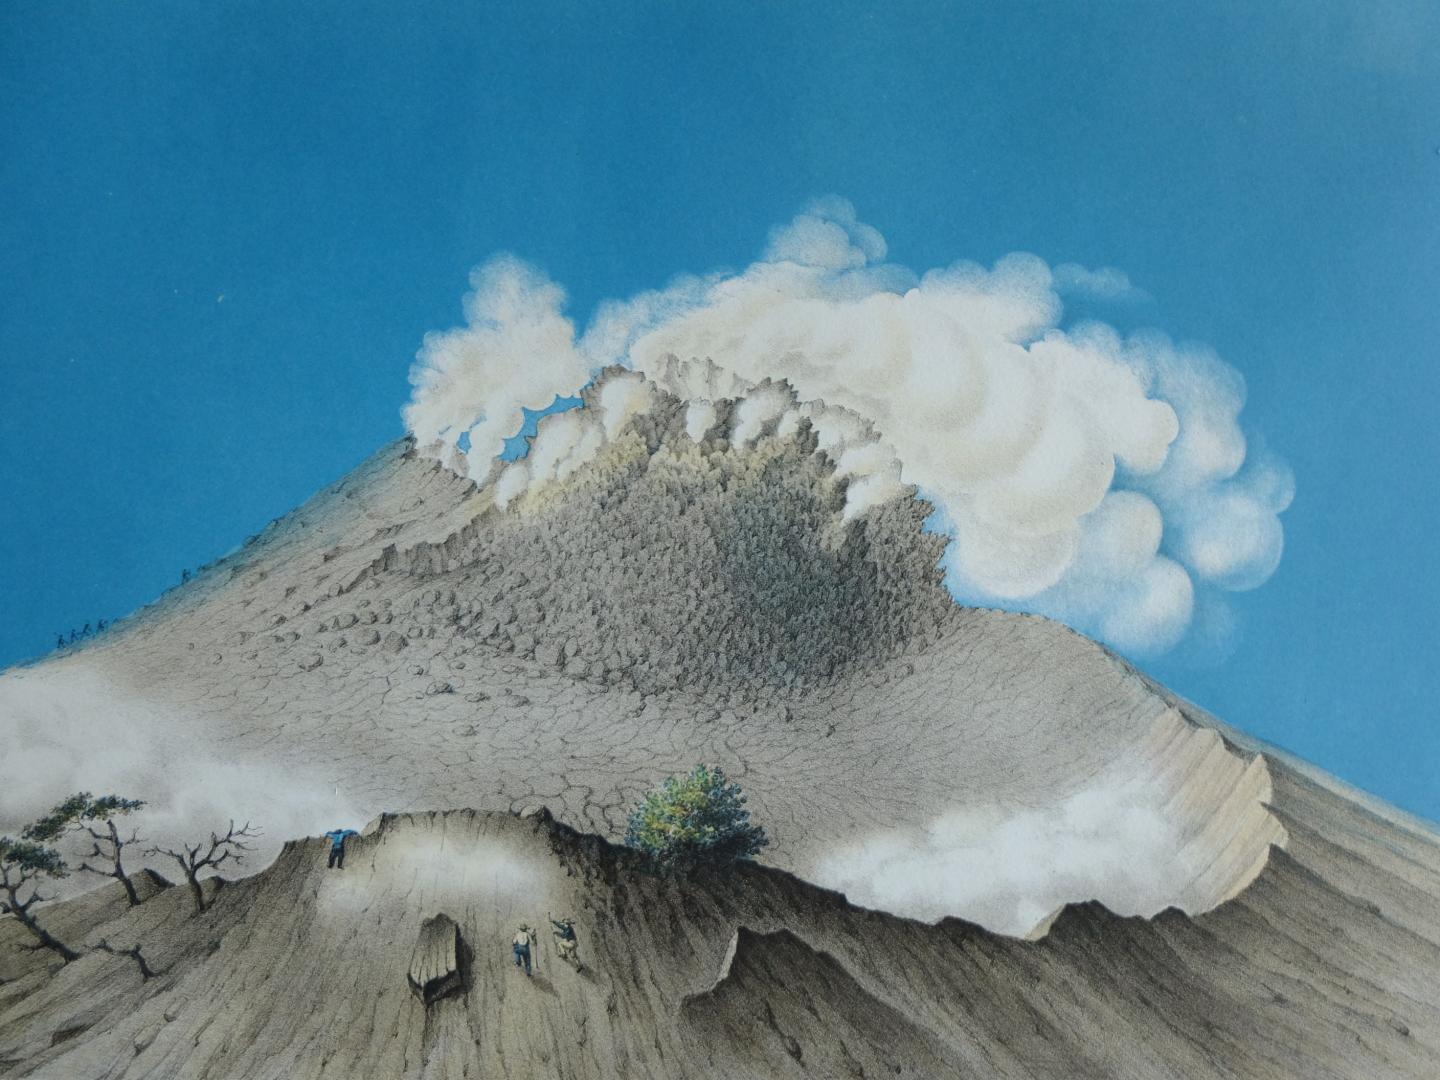 the top of a volcano spews ash, two figures below point near dead trees, against a blue sky